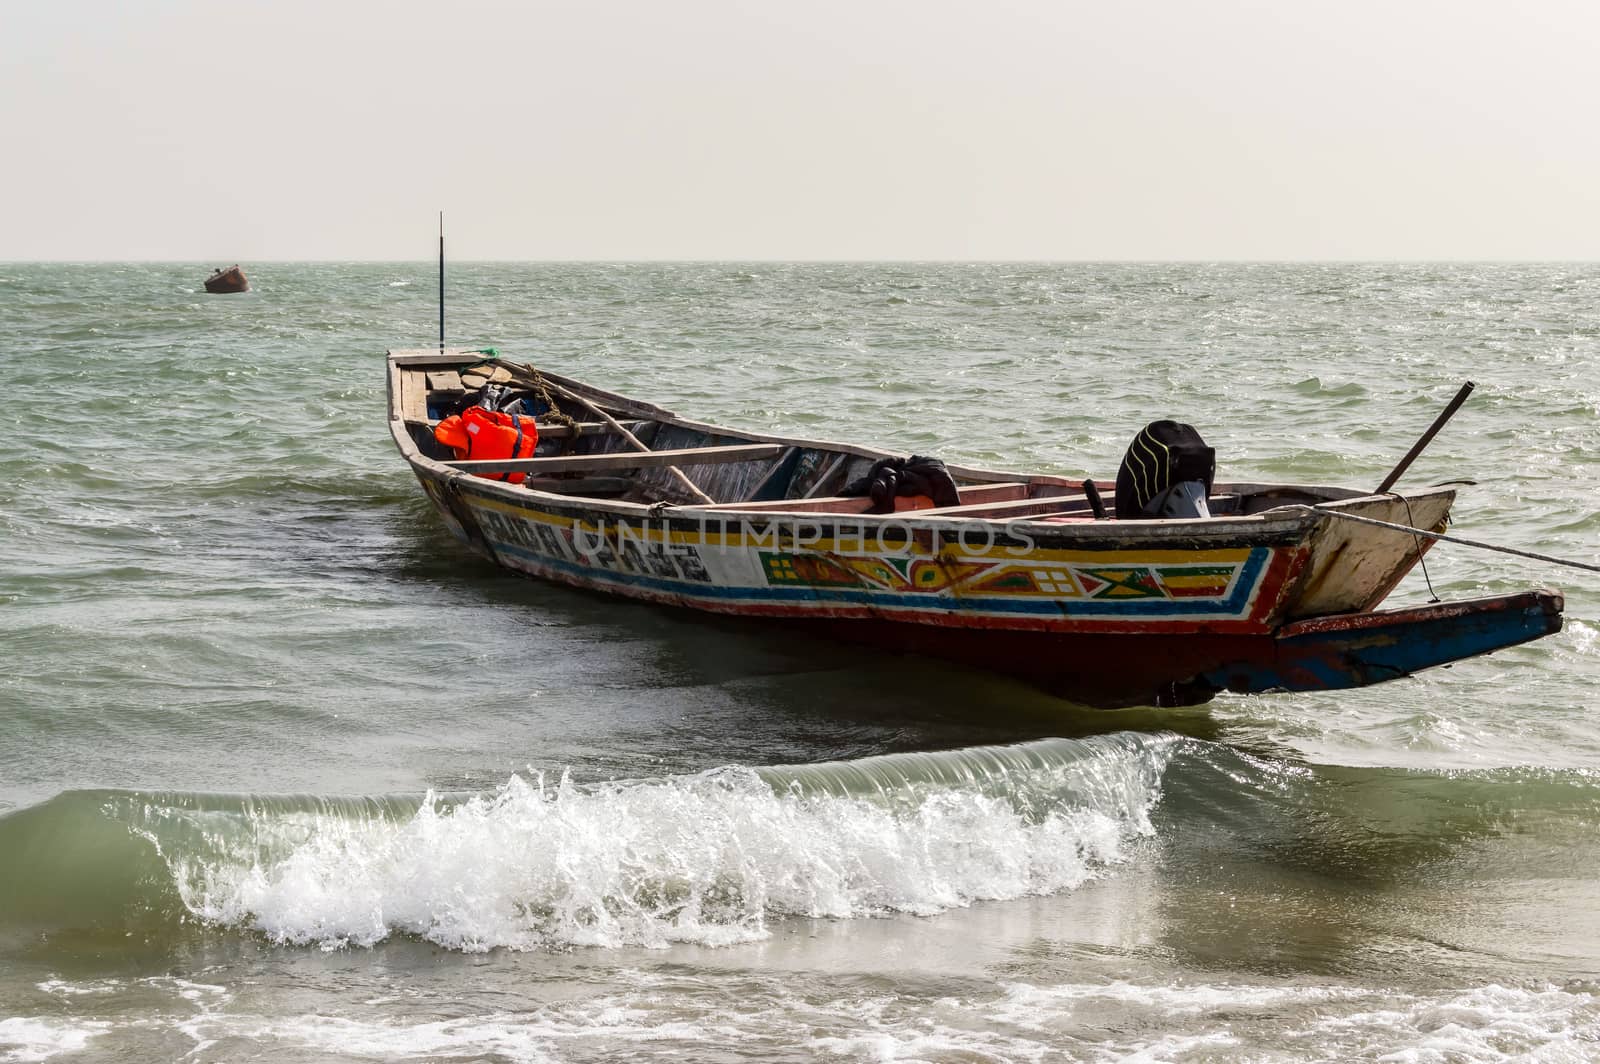 Colorful fishing boat in Banjul,  by Philou1000